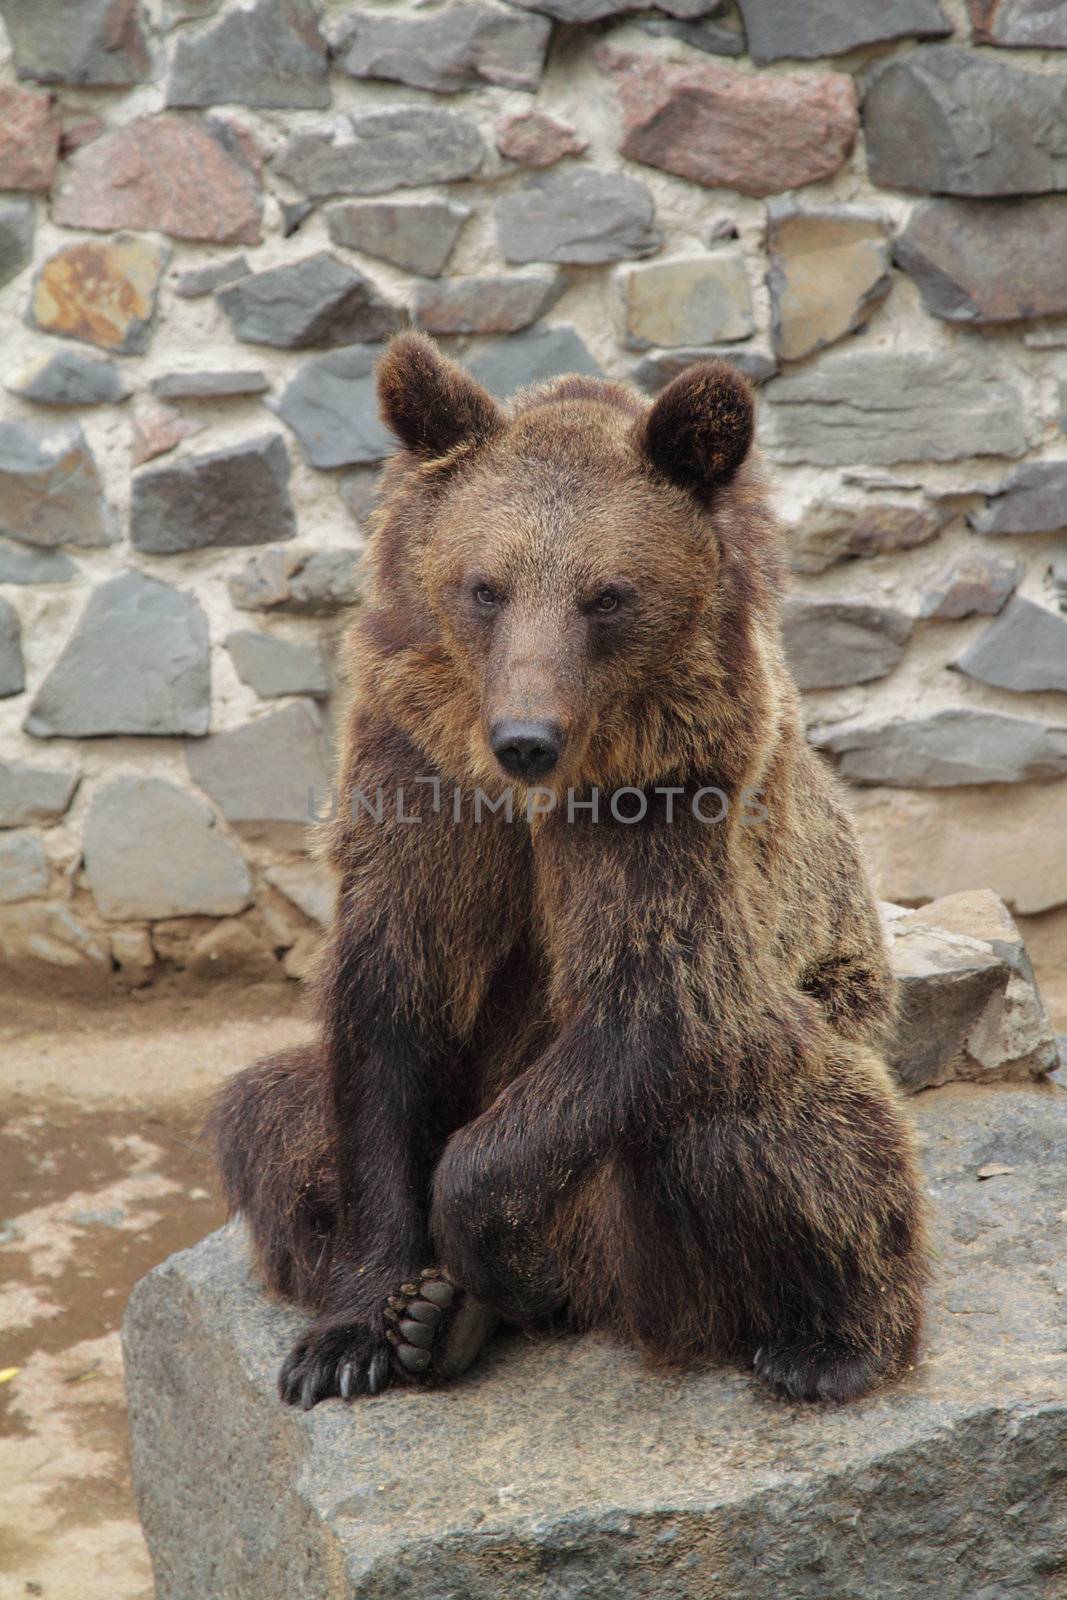 A brown bear on a stone in the zoo